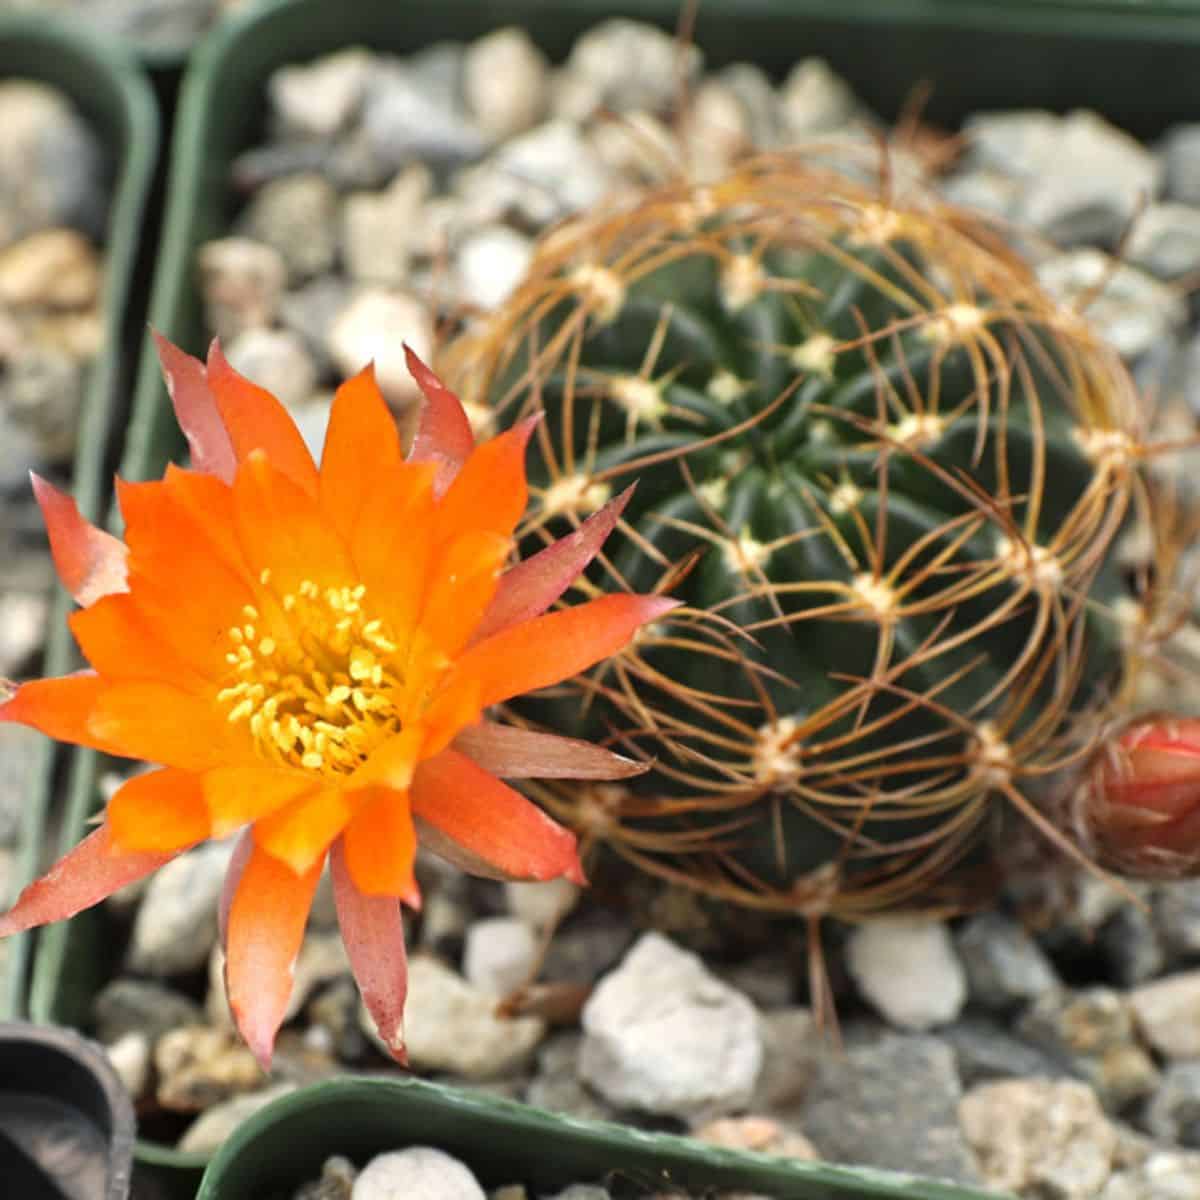 Flowering Echinopsis ancistrophora in a pot.